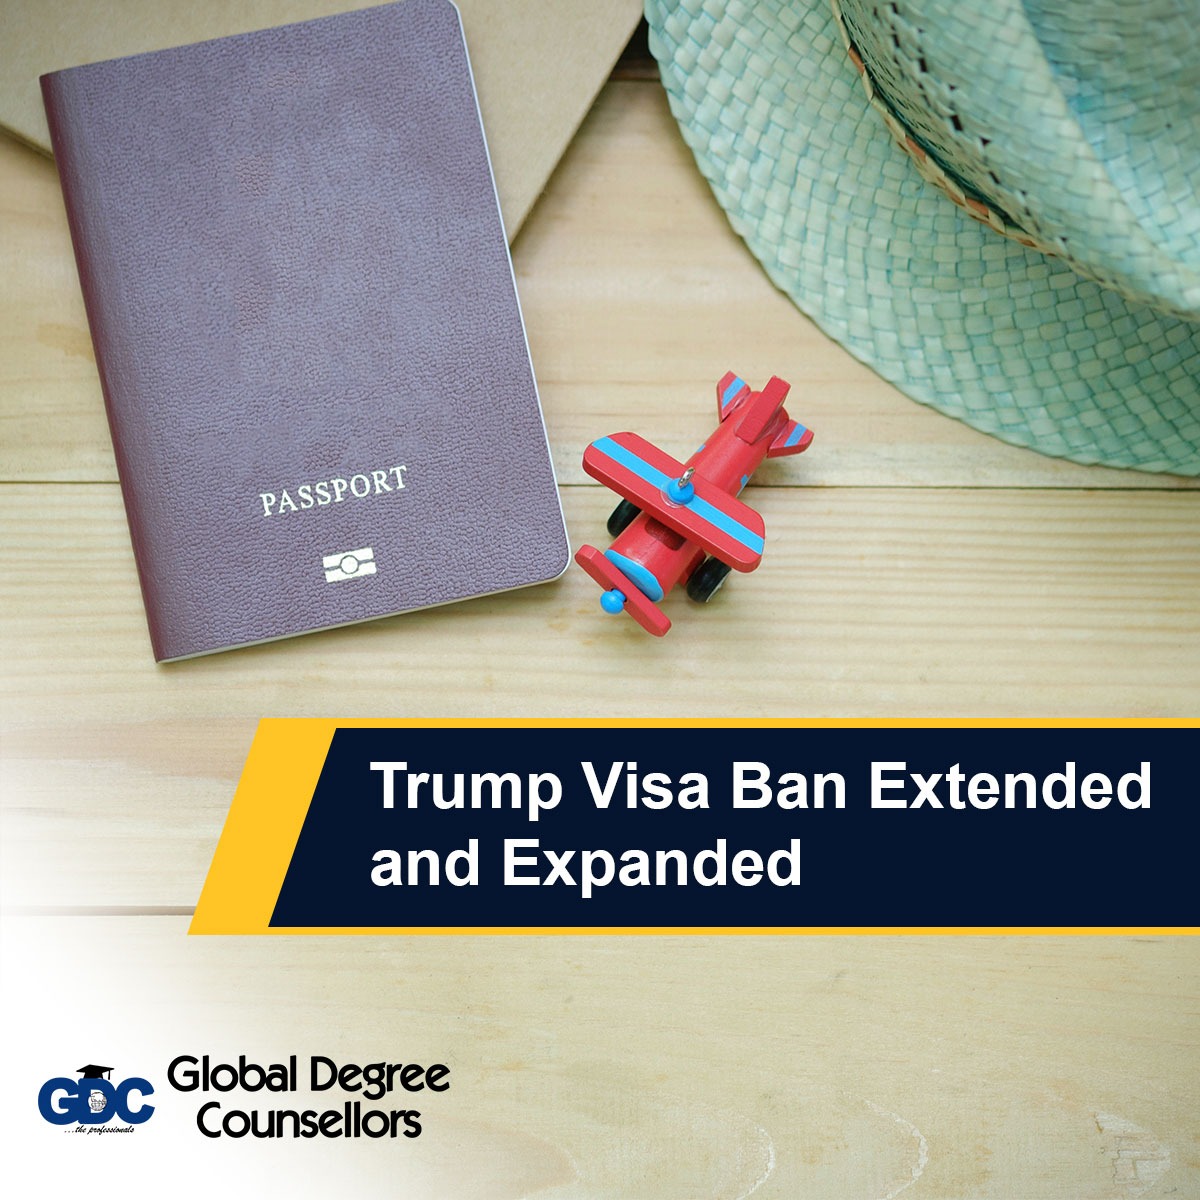 Trump Visa Ban Extended and Expanded